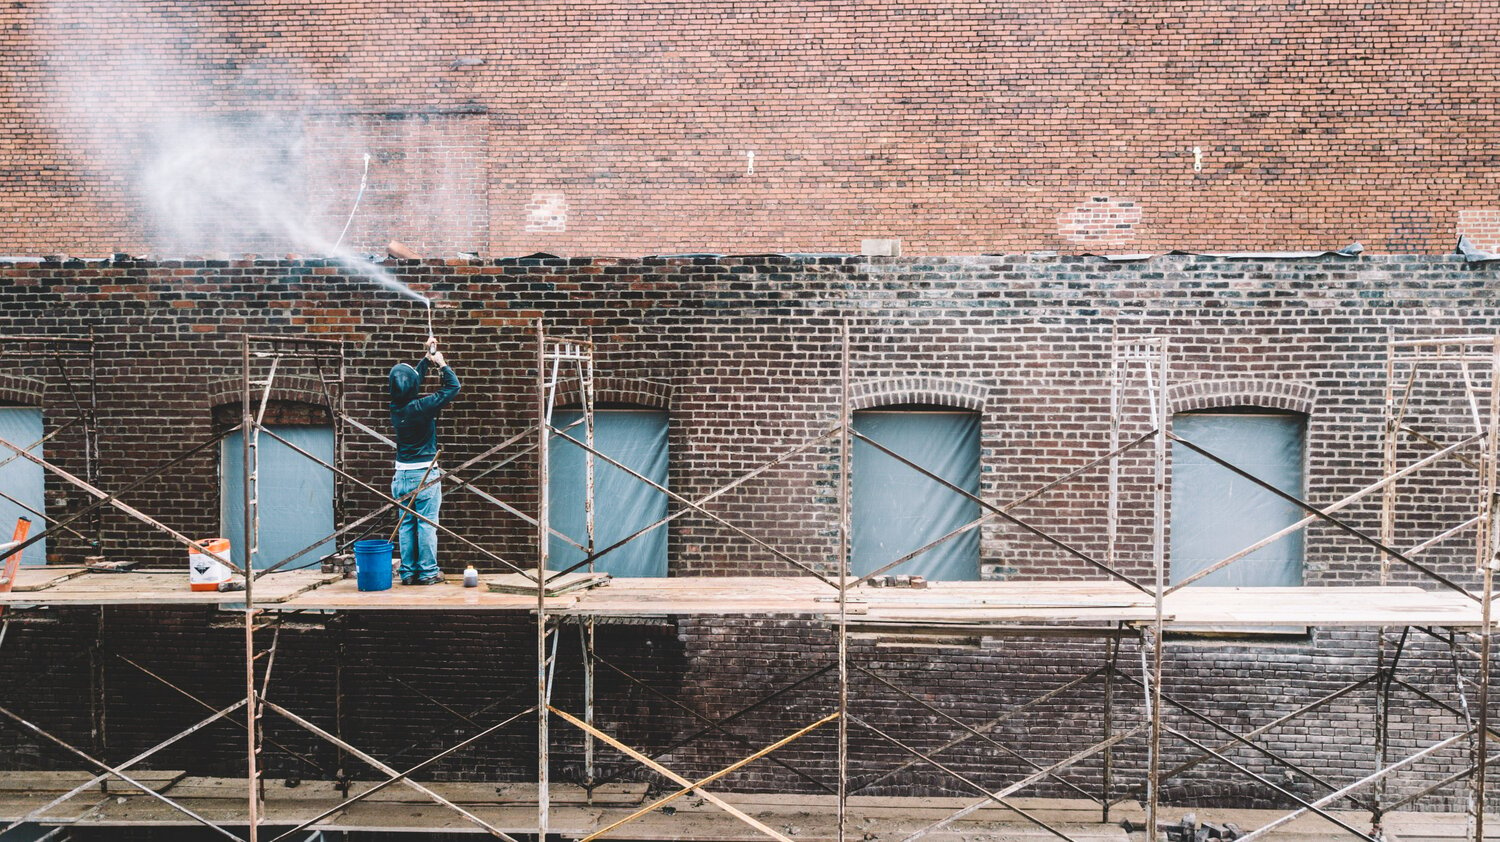 Brick Cleaning